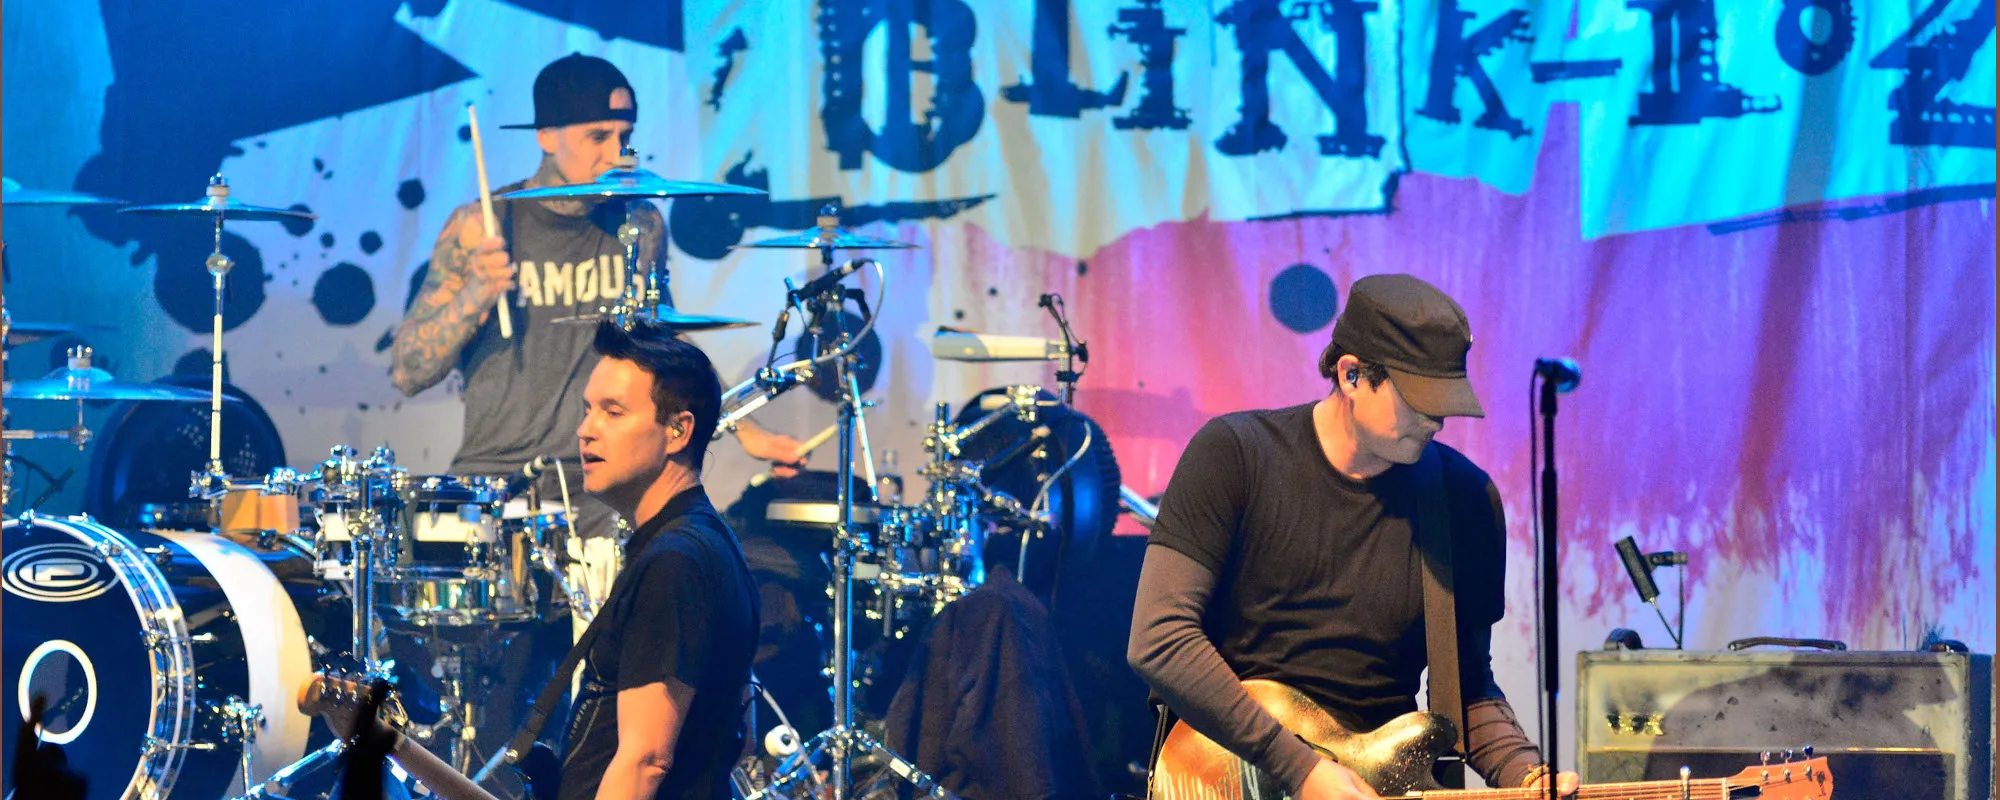 Classic Blink-182 Lineup Announces 2023 World Tour, New Music to Come